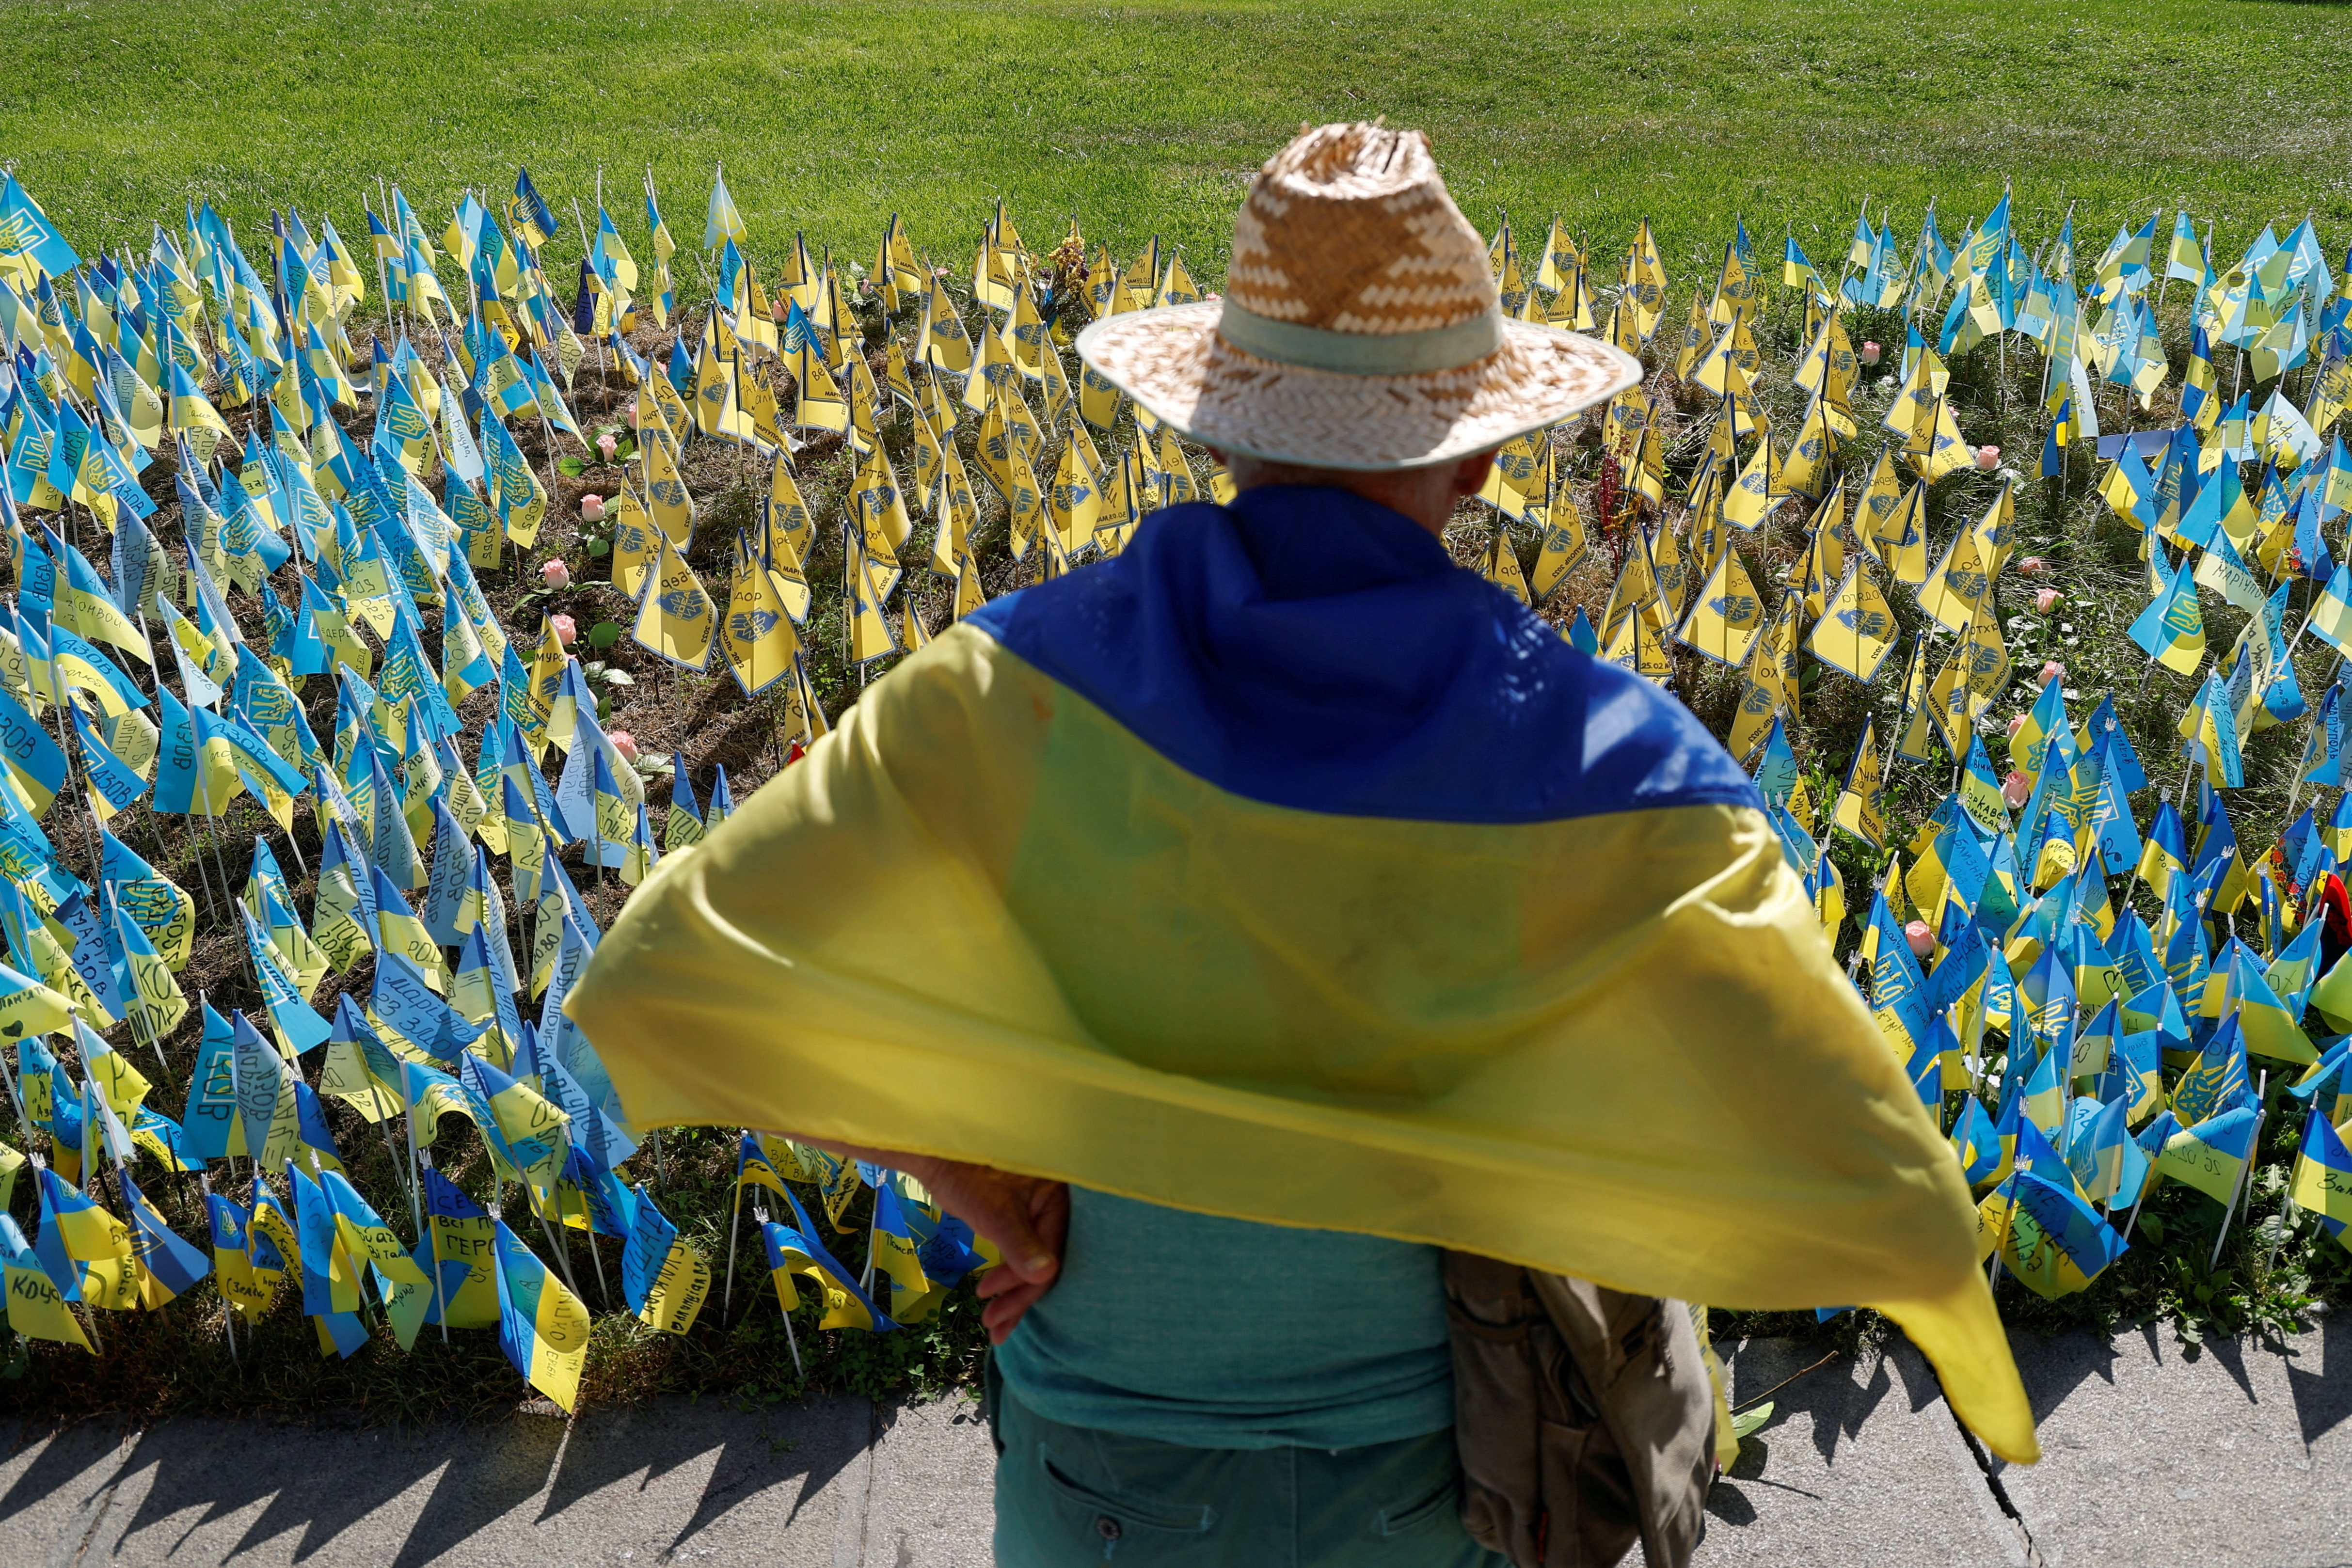 The celebration of the Independence Day in Kyiv